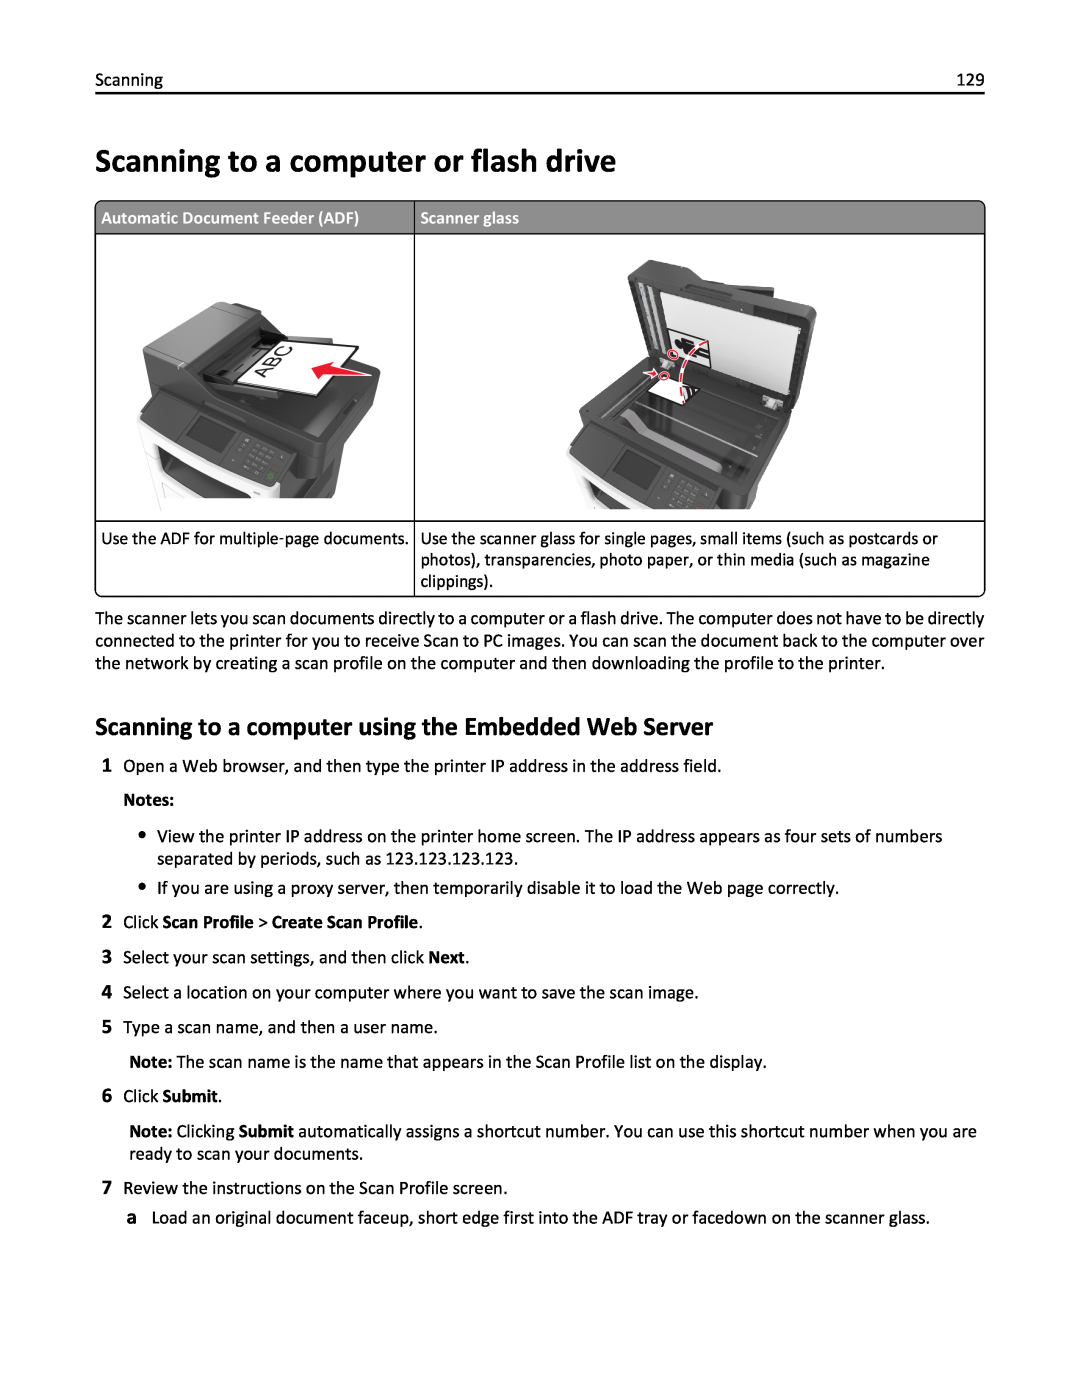 Lexmark 675, 470, 35S5701, 670 Scanning to a computer or flash drive, Scanning to a computer using the Embedded Web Server 